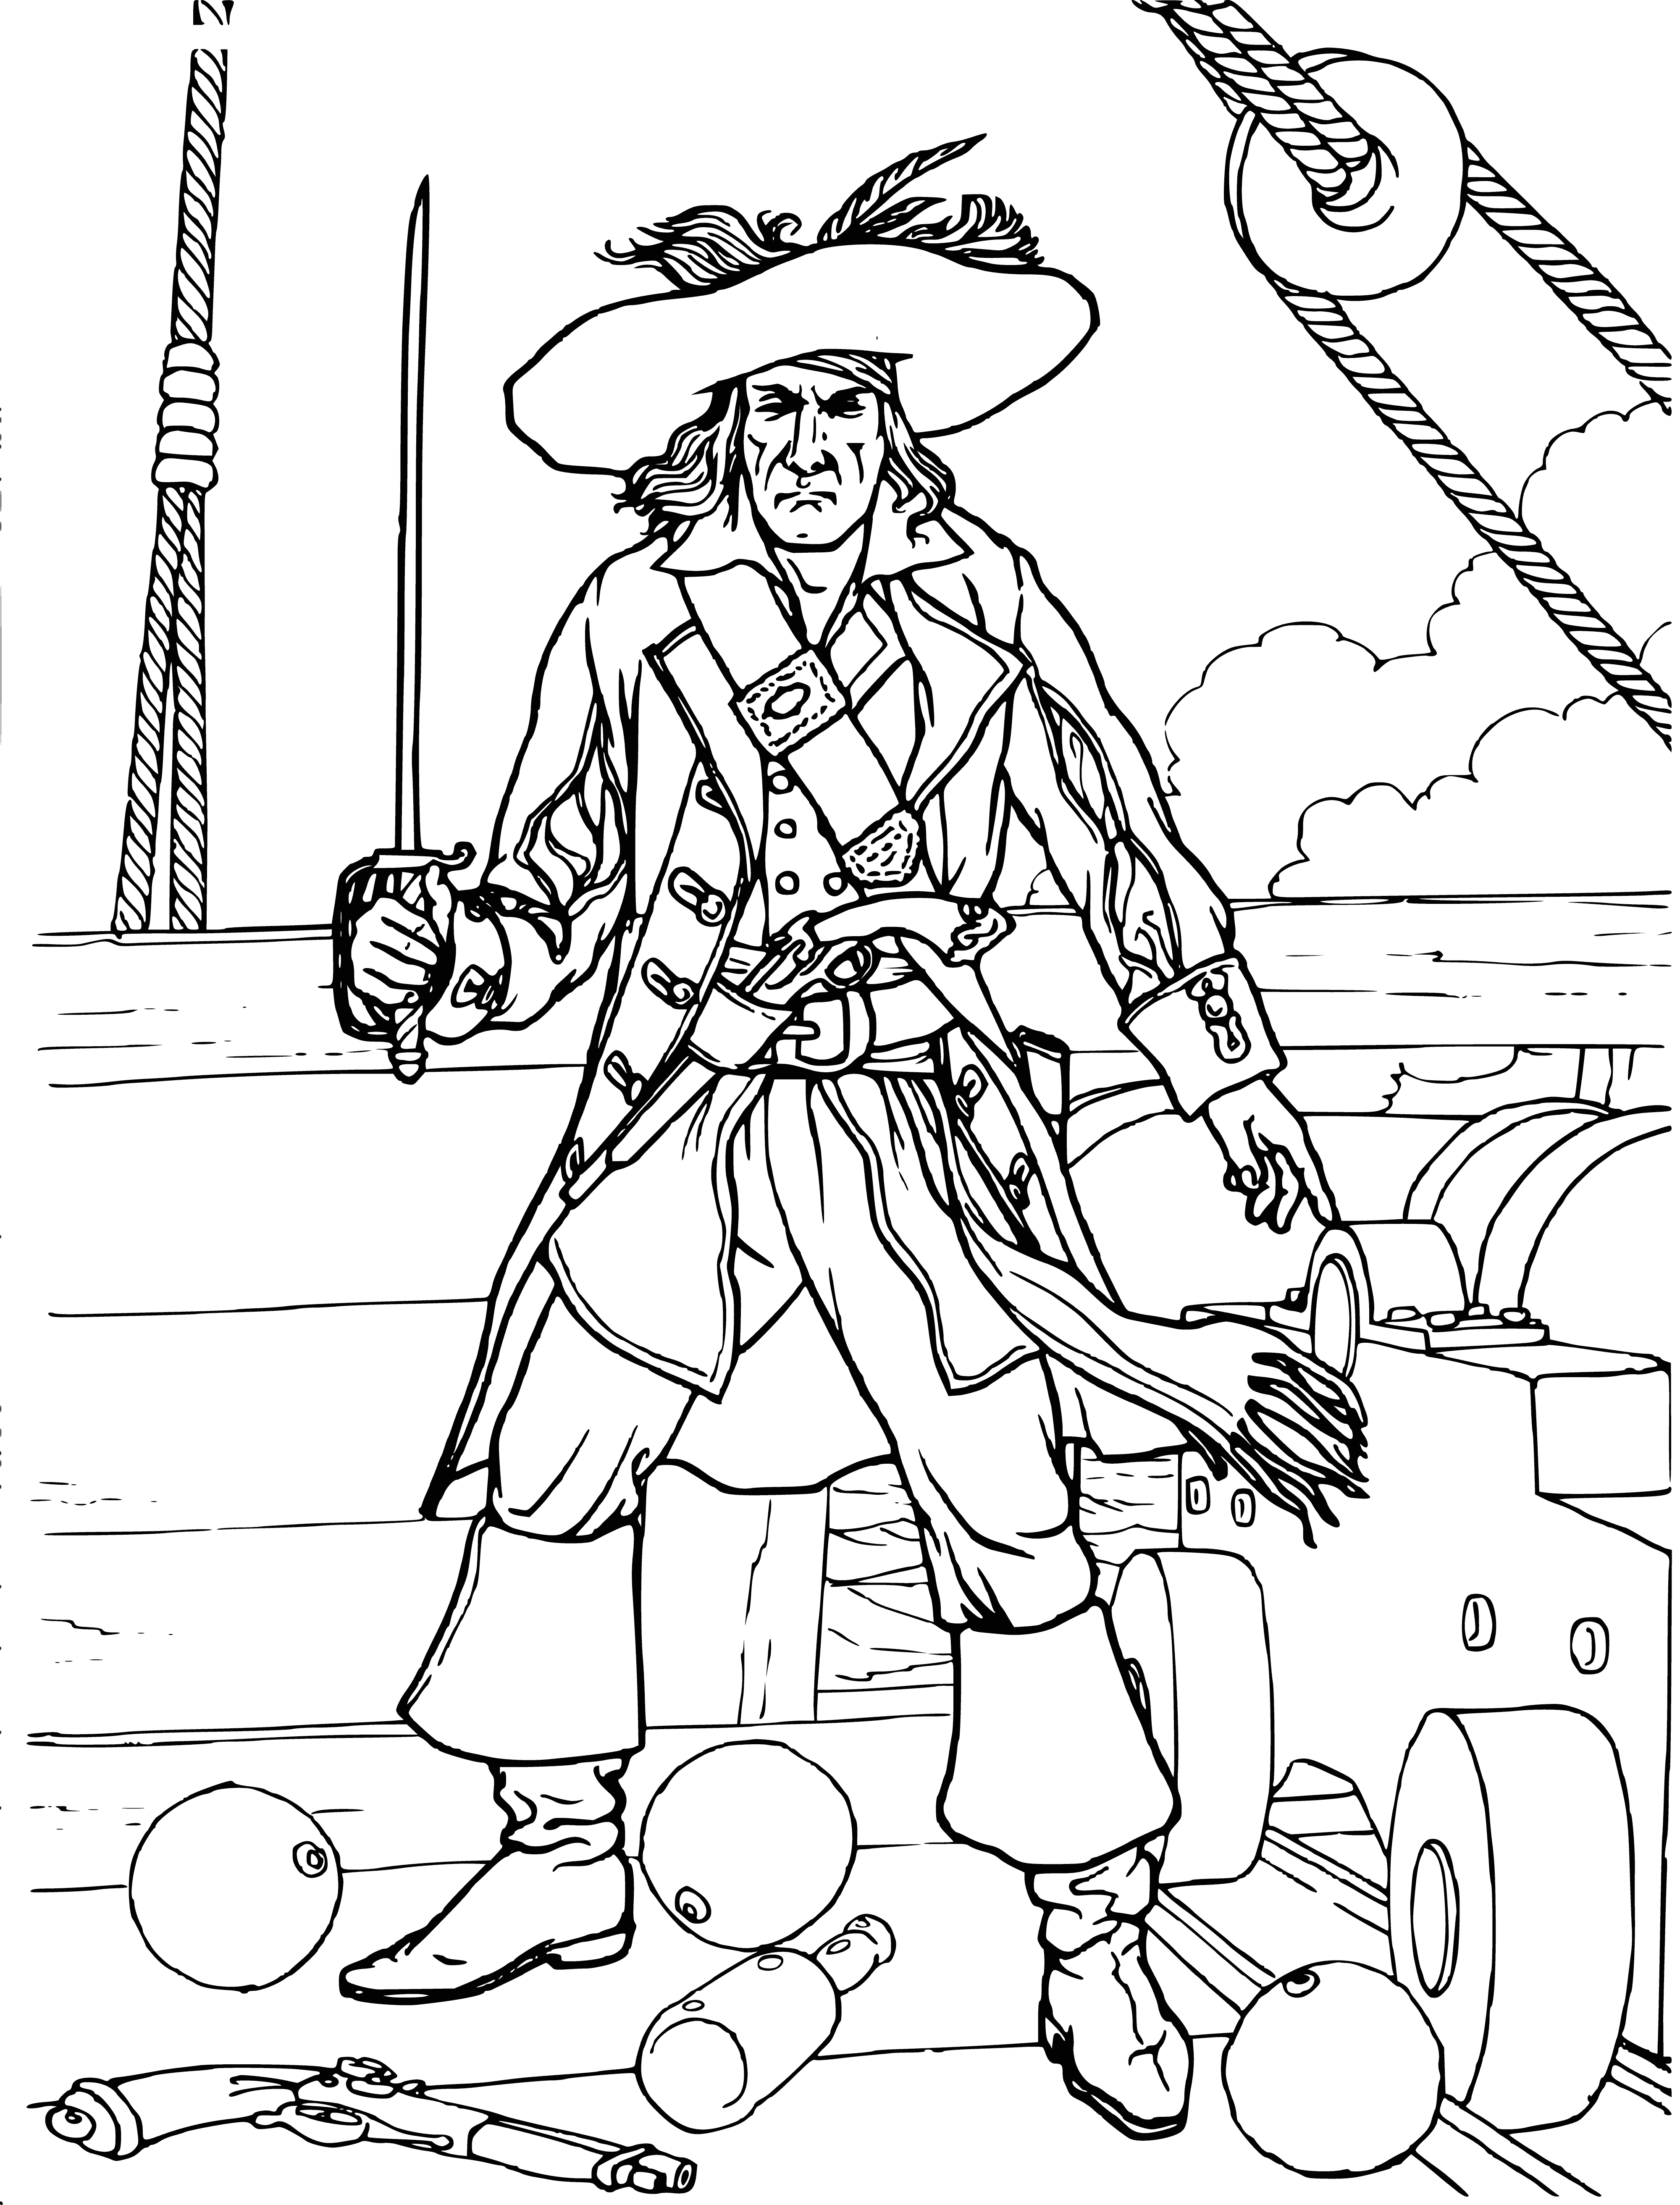 coloring page: Man in tattered clothing, armed with sword, readying for fight aboard large ship. Sailors waiting on deck. Ready for battle!